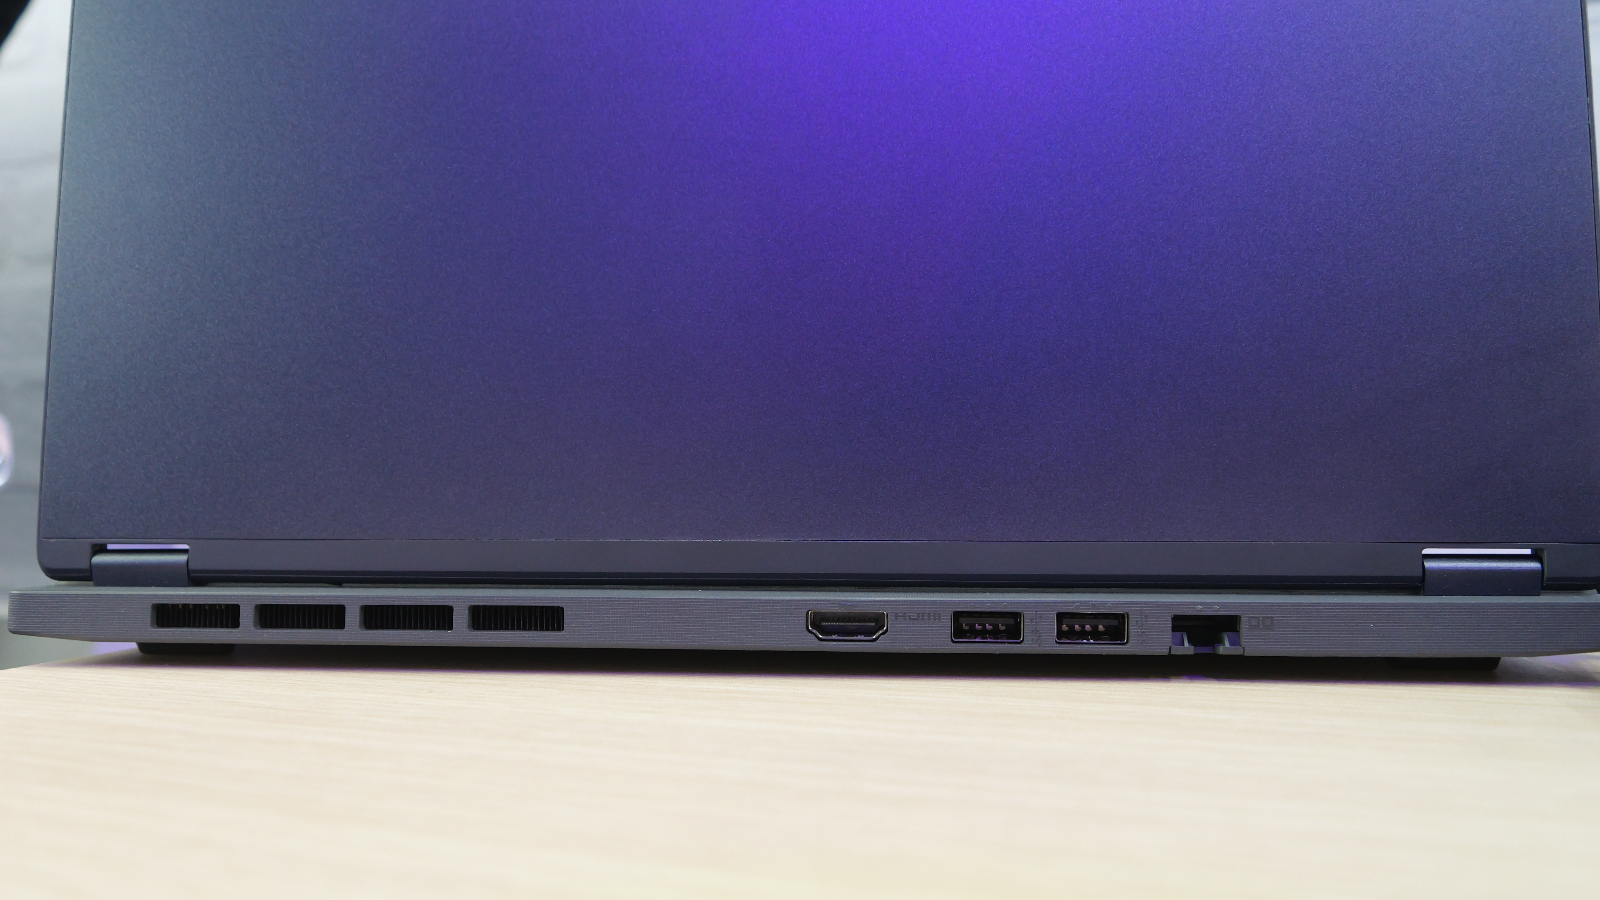 MSI gets straight to business with the new Commerical 14 laptop — hands-on first impressions